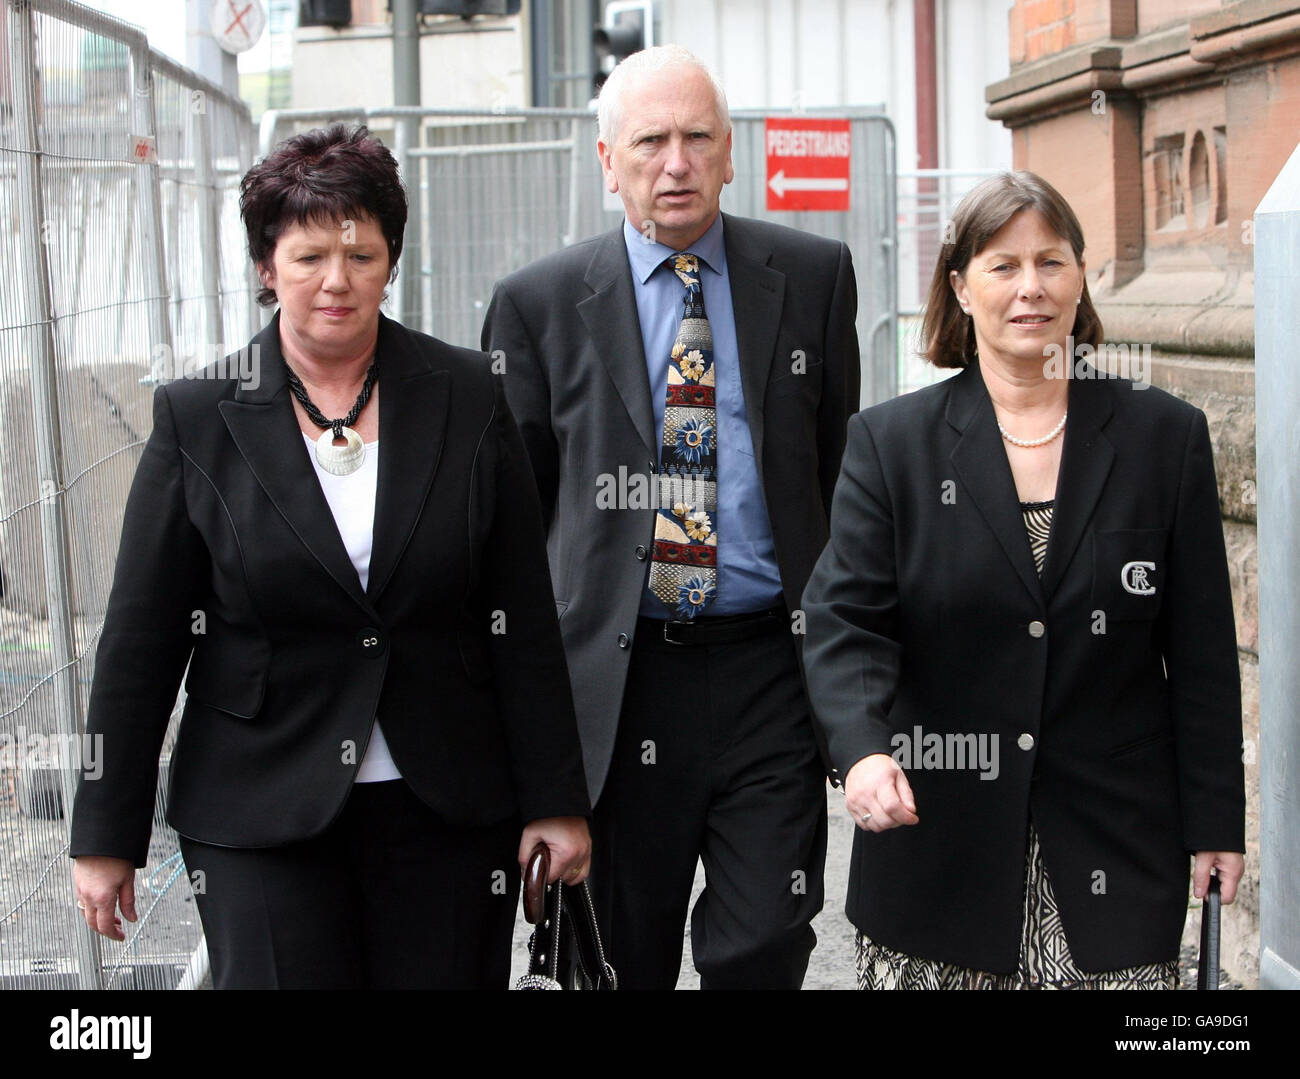 Sam Torney (centre), the brother of Police Constable John Torney, leaves Belfast Coroners court with his wife Hilary (right) and sister Elizabeth Ferguson (left) following the inquest into John's death in prison. Stock Photo